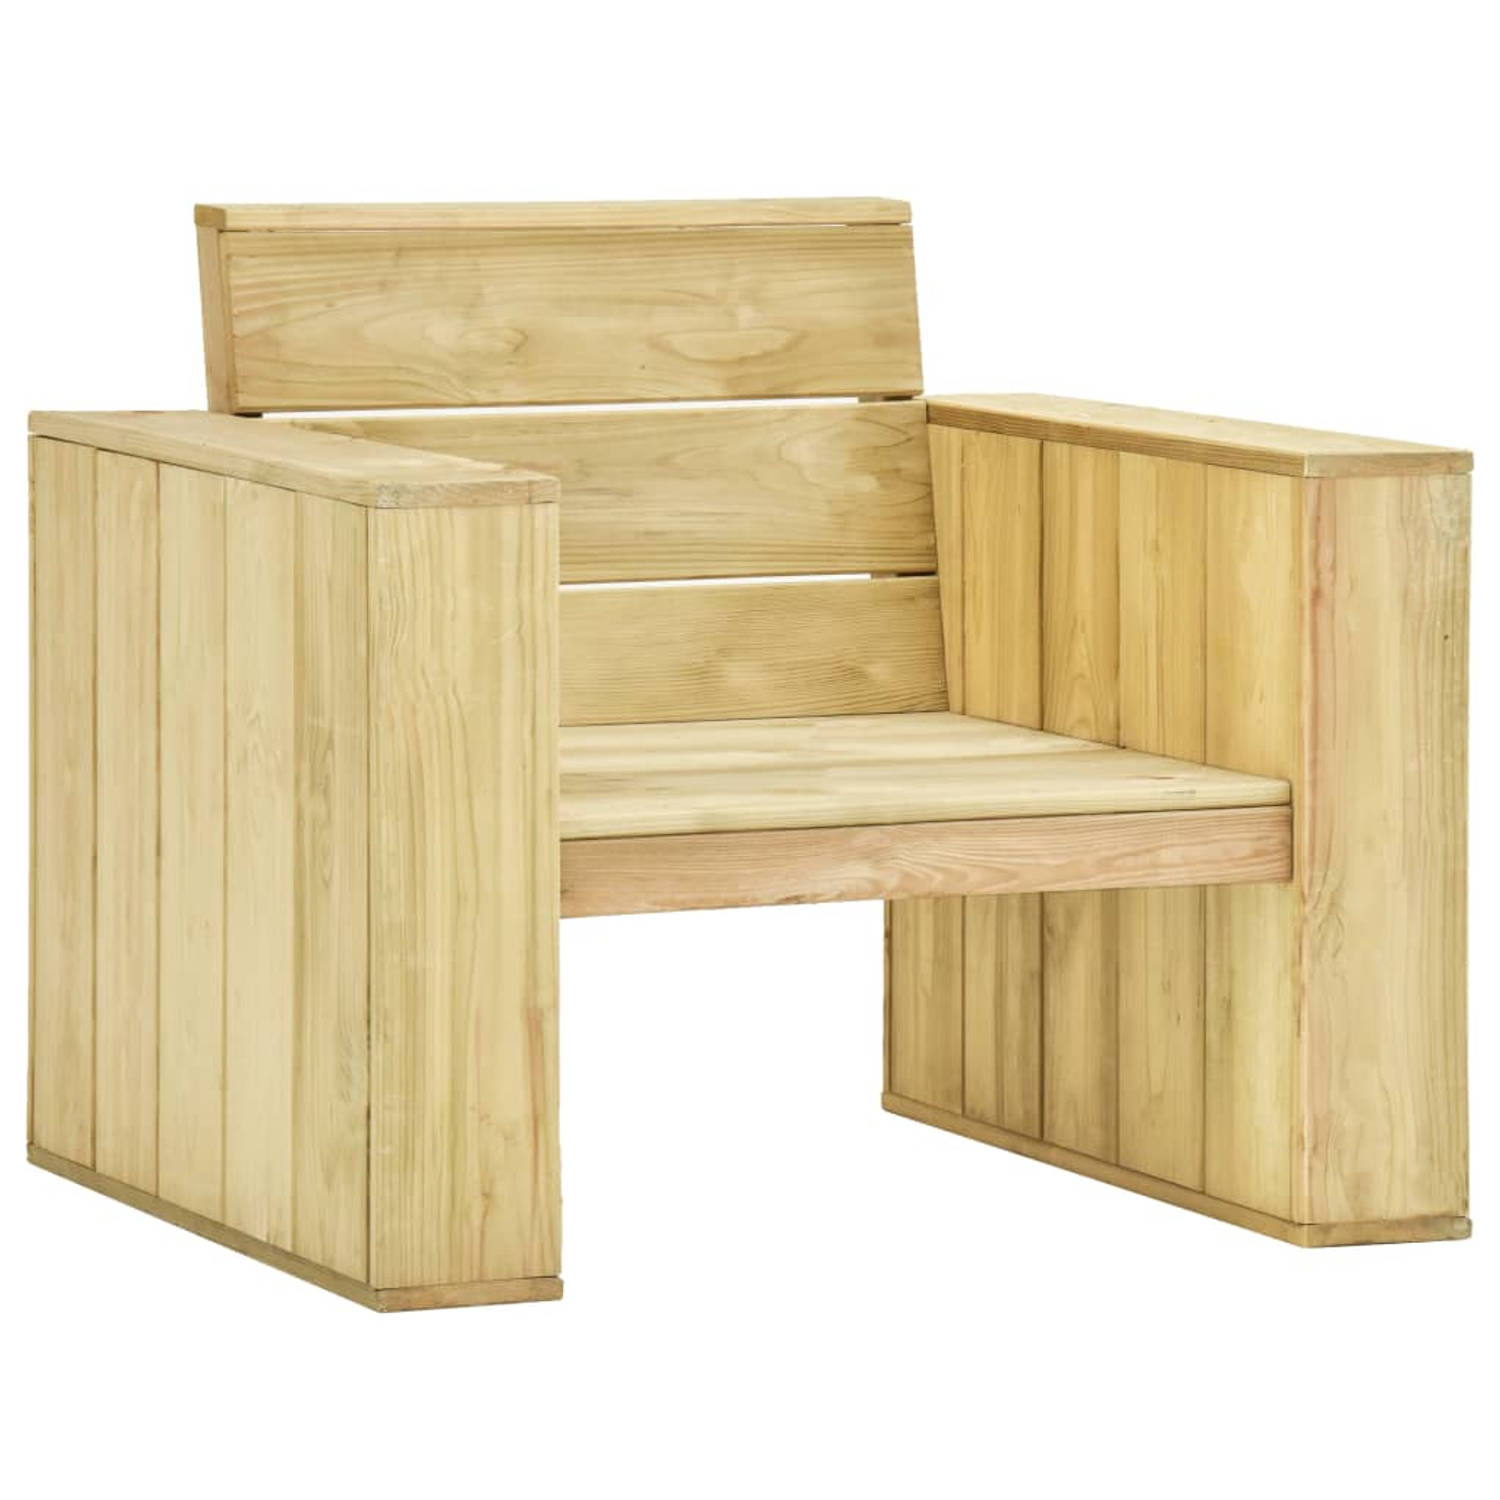 The Living Store Tuinset - Grenenhout - Rood - 2 stoelen - 1 tafel - 89x76x76 cm - 75x75x31 cm - 60x60x10 cm - 60x40x10 cm